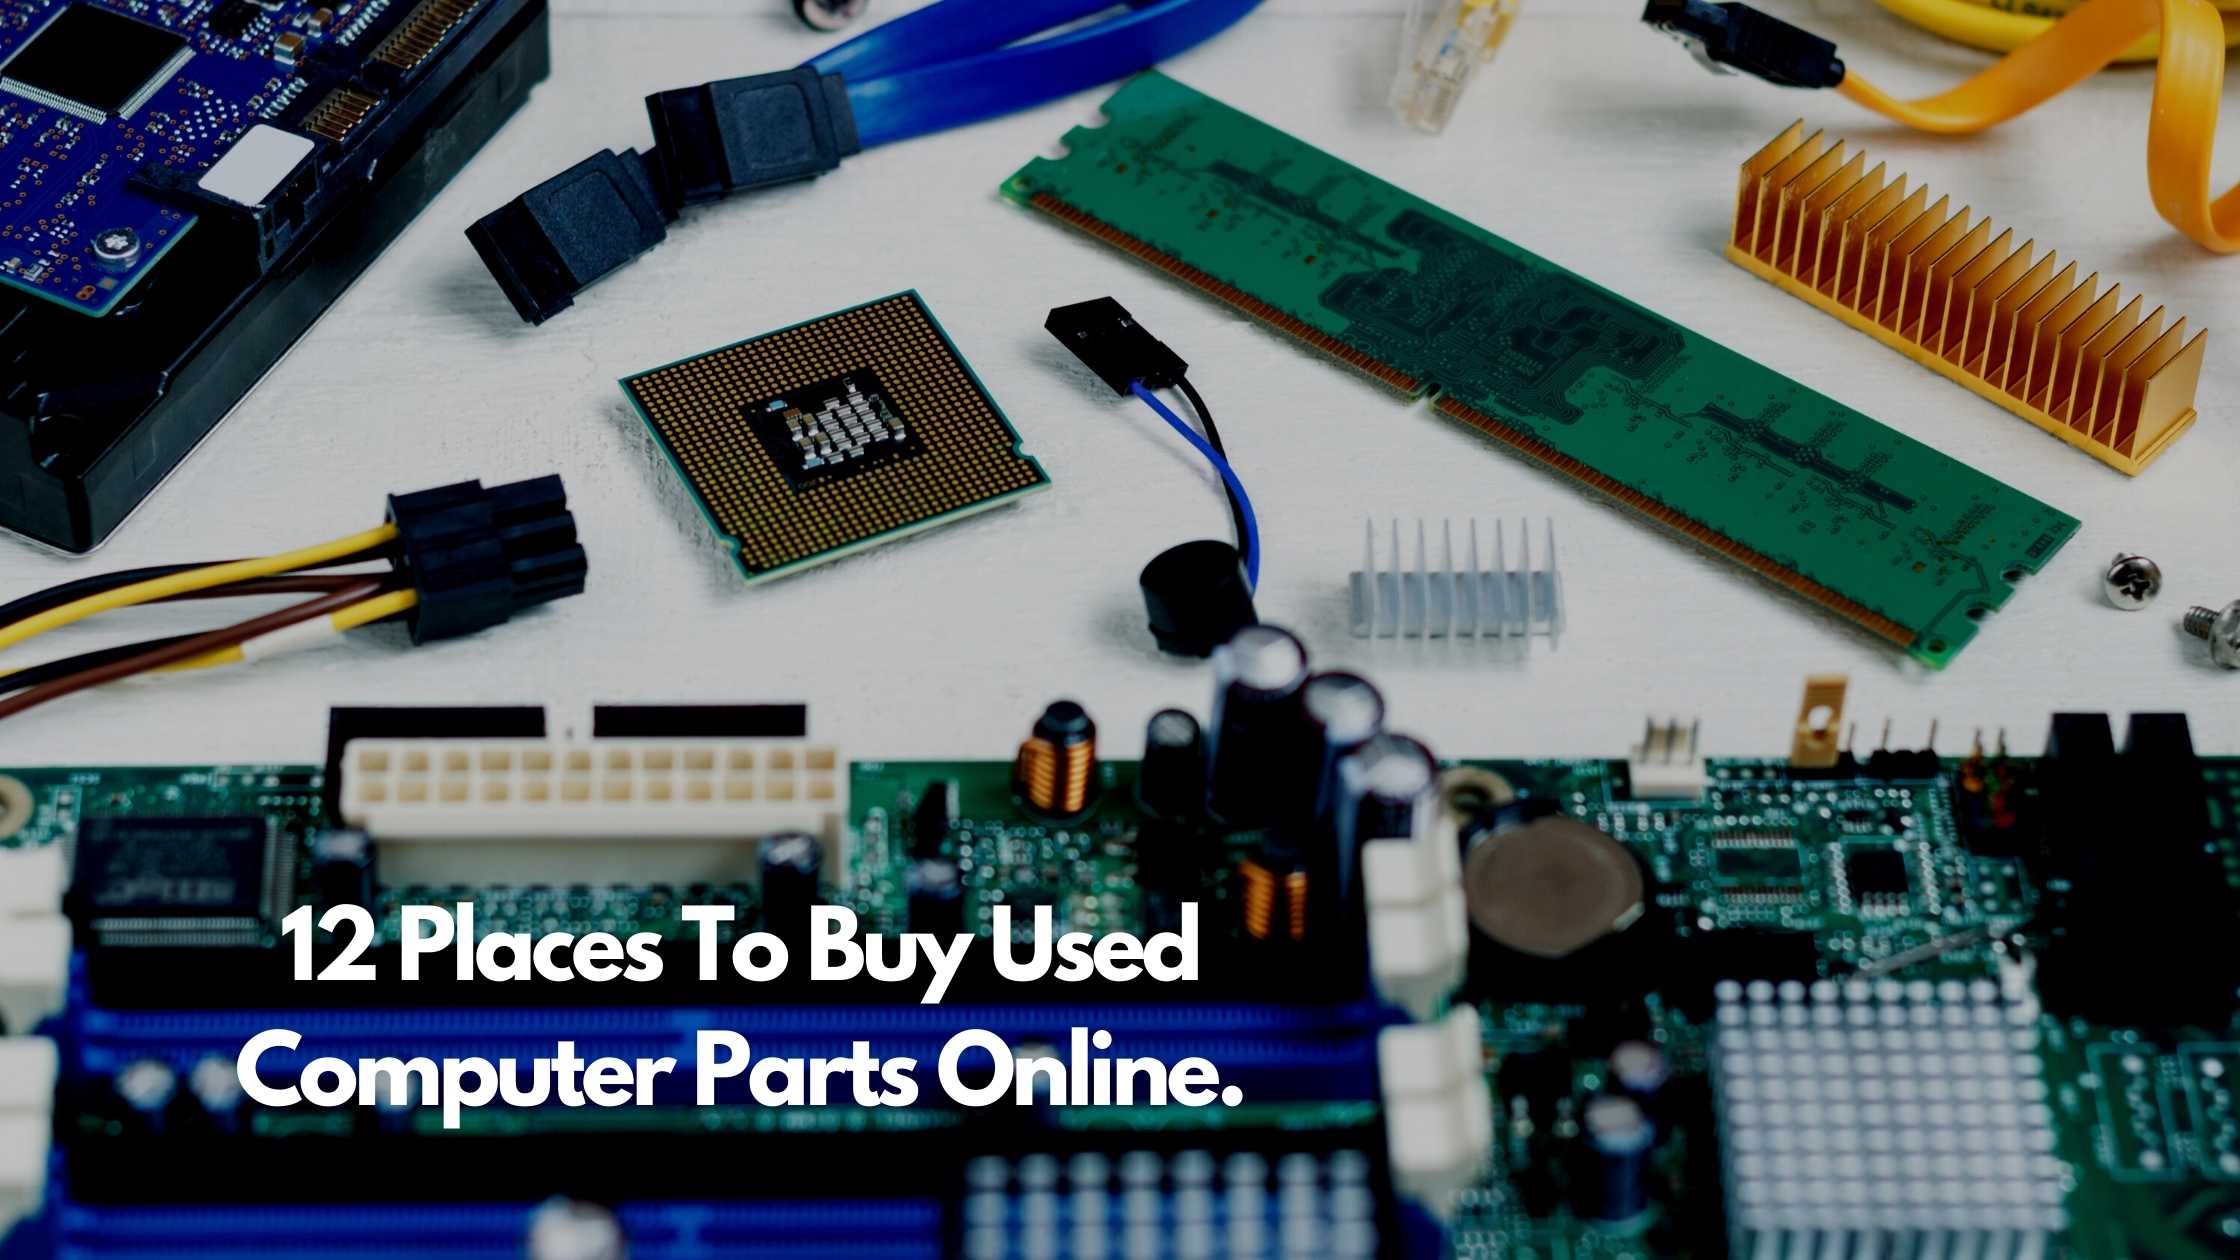 How to sell used PC parts